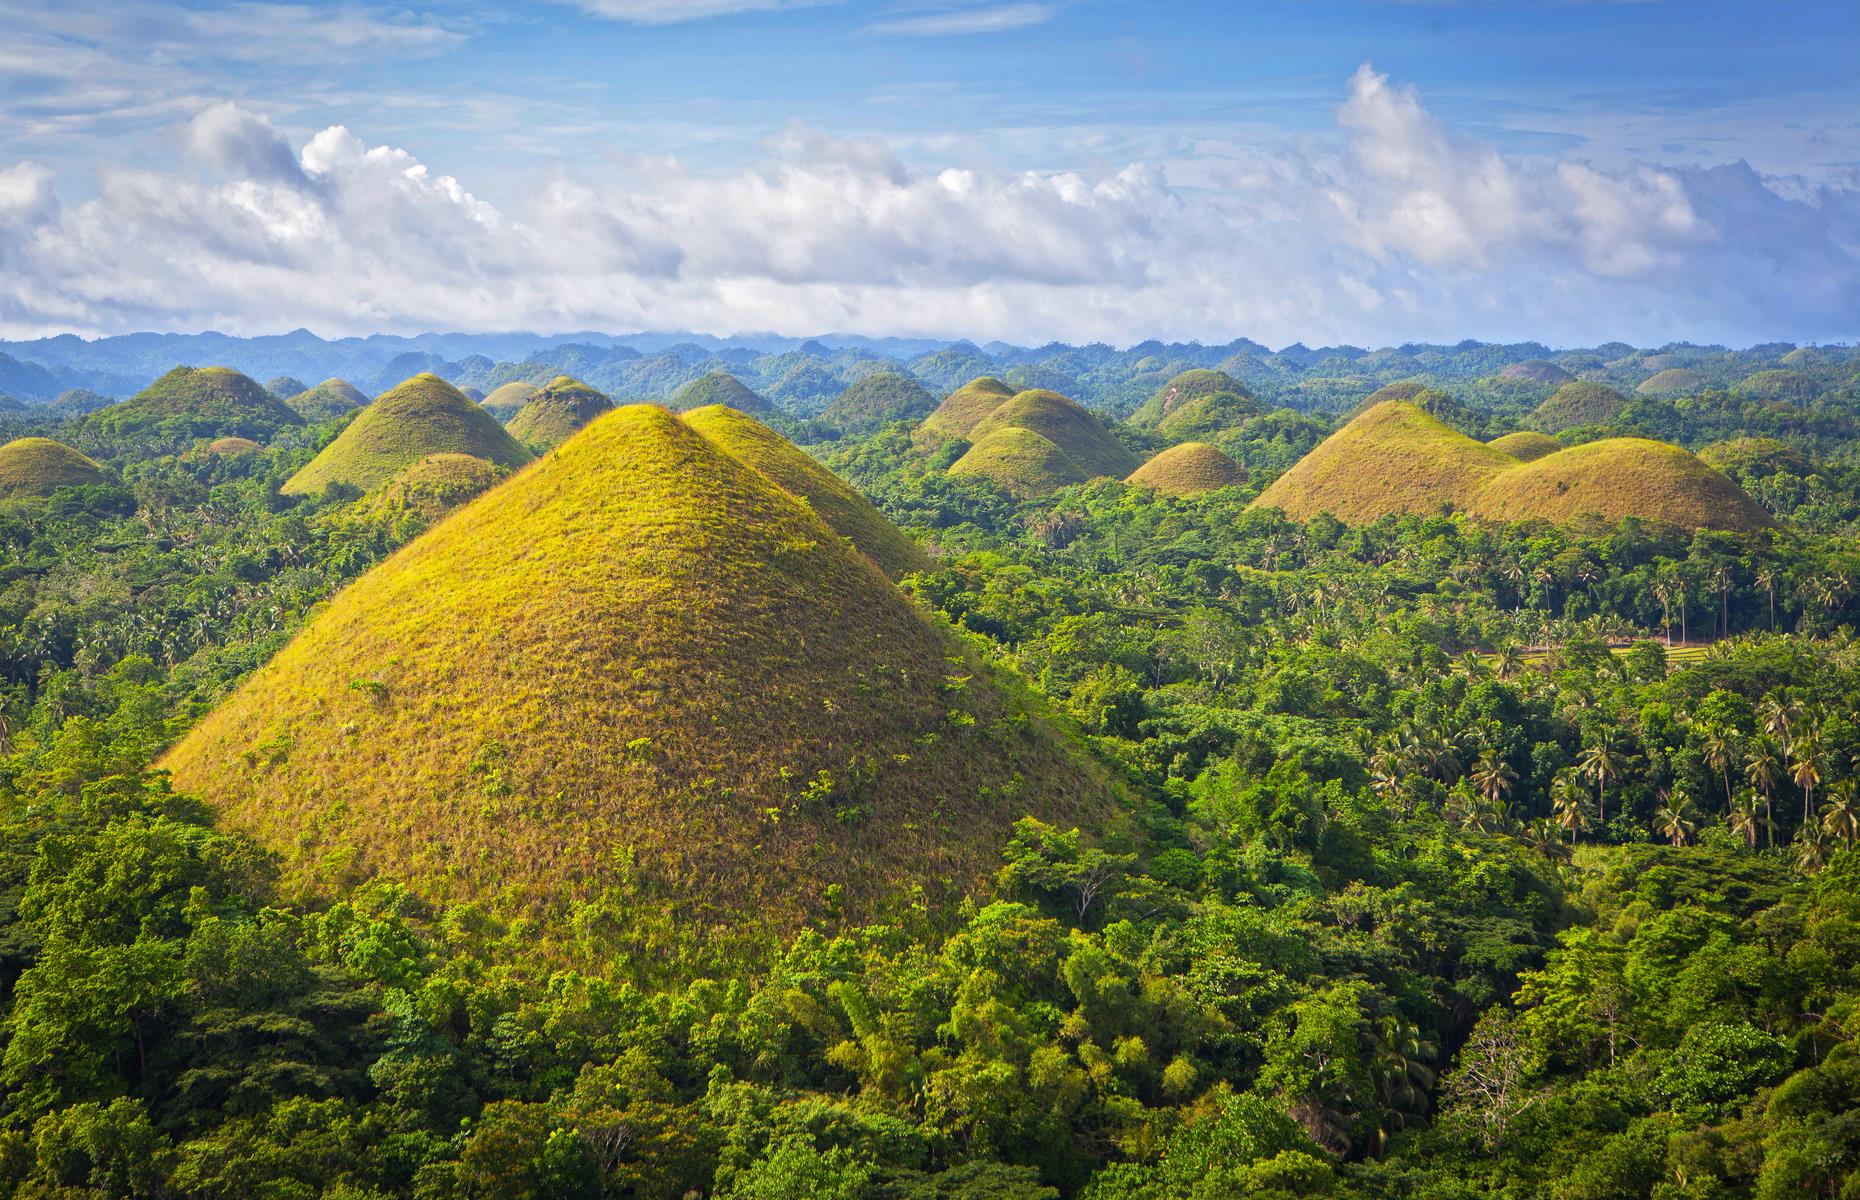 <p>The Philippines' conical Chocolate Hills – some of which soar to 394 feet (120m) – are another natural wonder often explained by magic. One legend involves a pair of squabbling giants, who launched mud and boulders at one another until they were exhausted. Their tiredness led them to forget their bickering and the havoc they'd wrought too. They left behind the towering Chocolate Hills and wandered off into the sunset. Another story claims the hills are the dried tears of an amorous giant, who was mourning the death of his mortal love.</p>